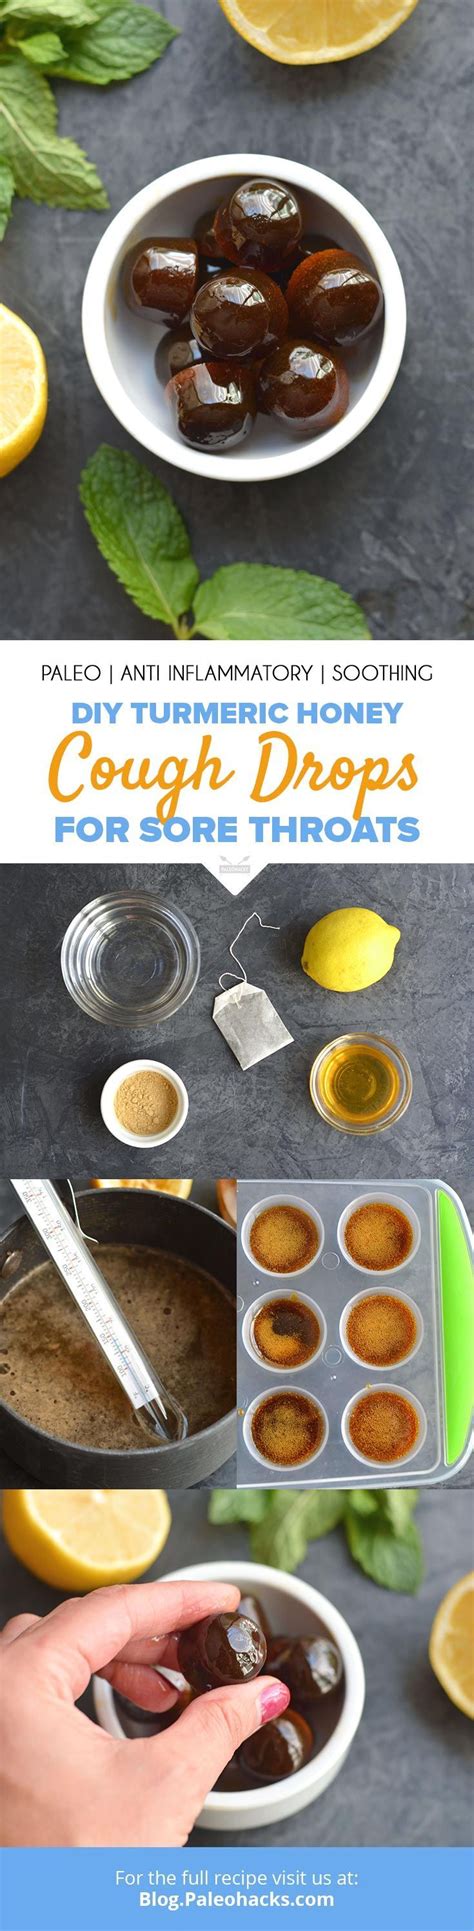 Ginger contains certain compounds that dilate the blood vessels of the lungs and relax smooth muscles that leading to the opening of the airways. DIY Turmeric Honey Cough Drops for Sore Throats | Recipe ...